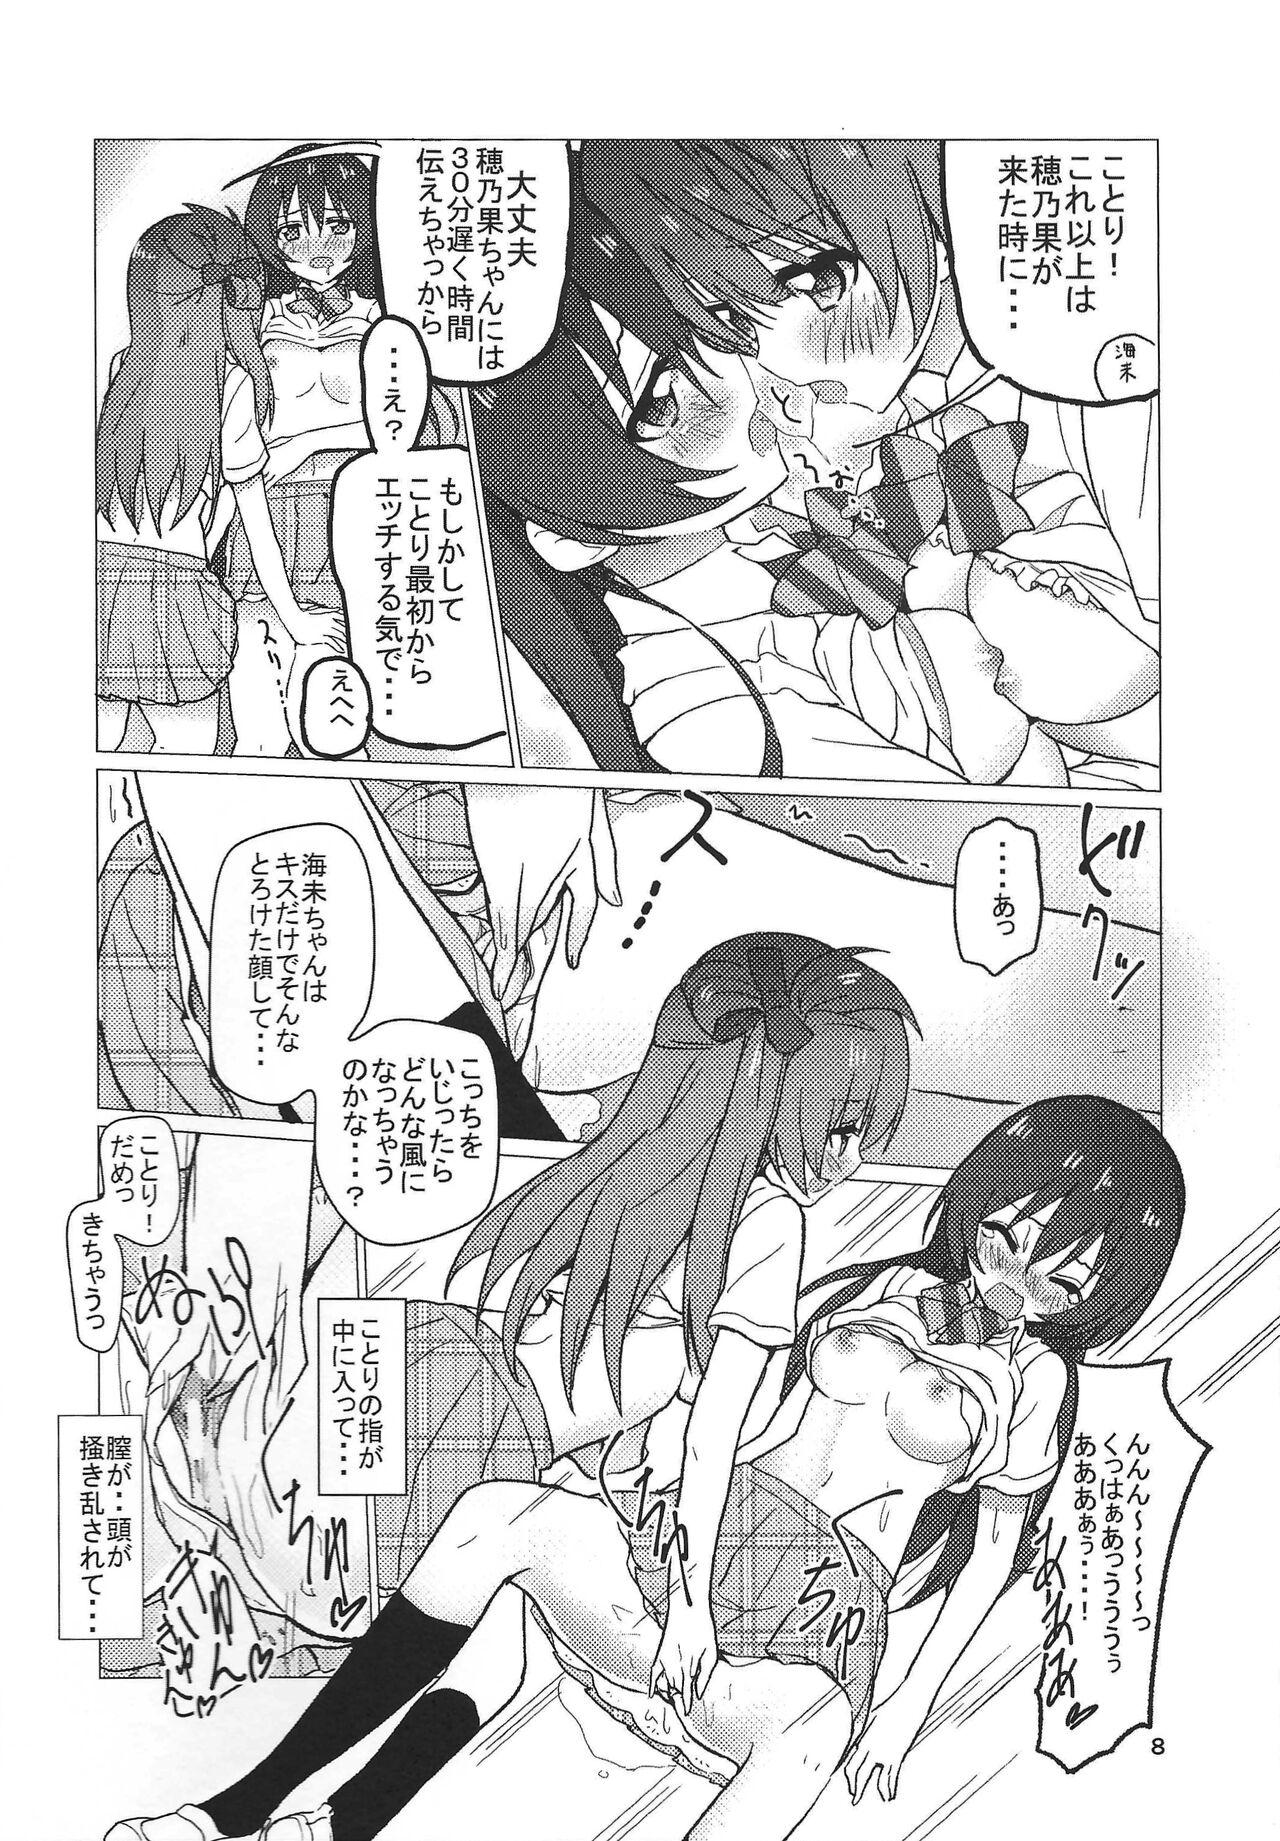 Insertion 海未ちゃん笑顔で1,2,Jump! - Love live Students - Page 7